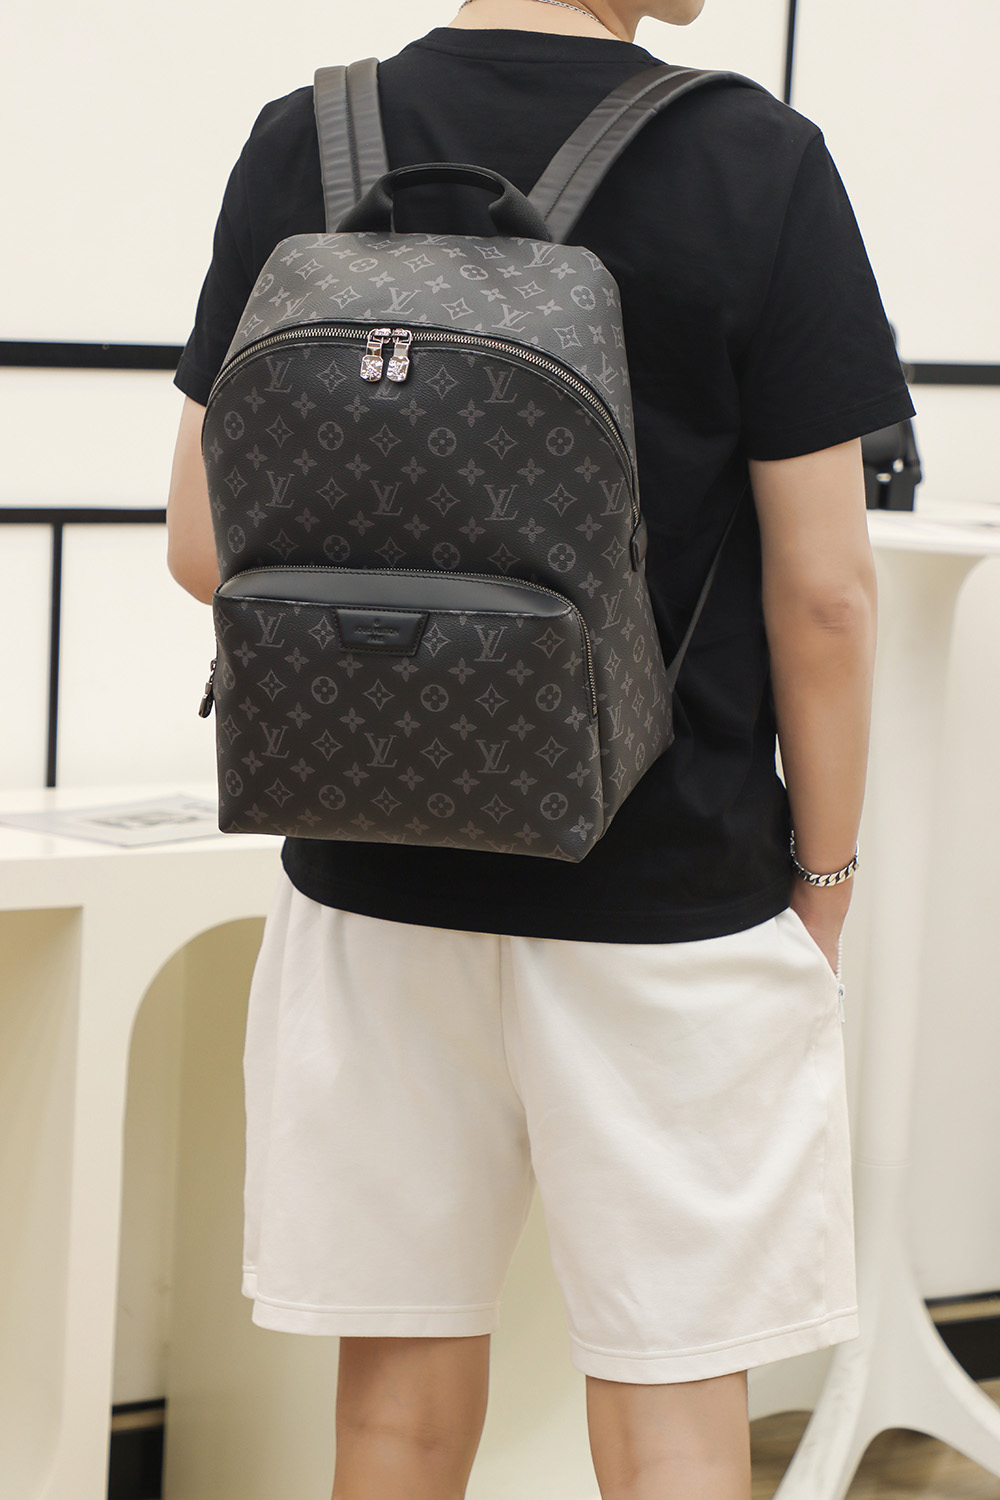 M43186 LV DISCOVERY BACKPACK PM